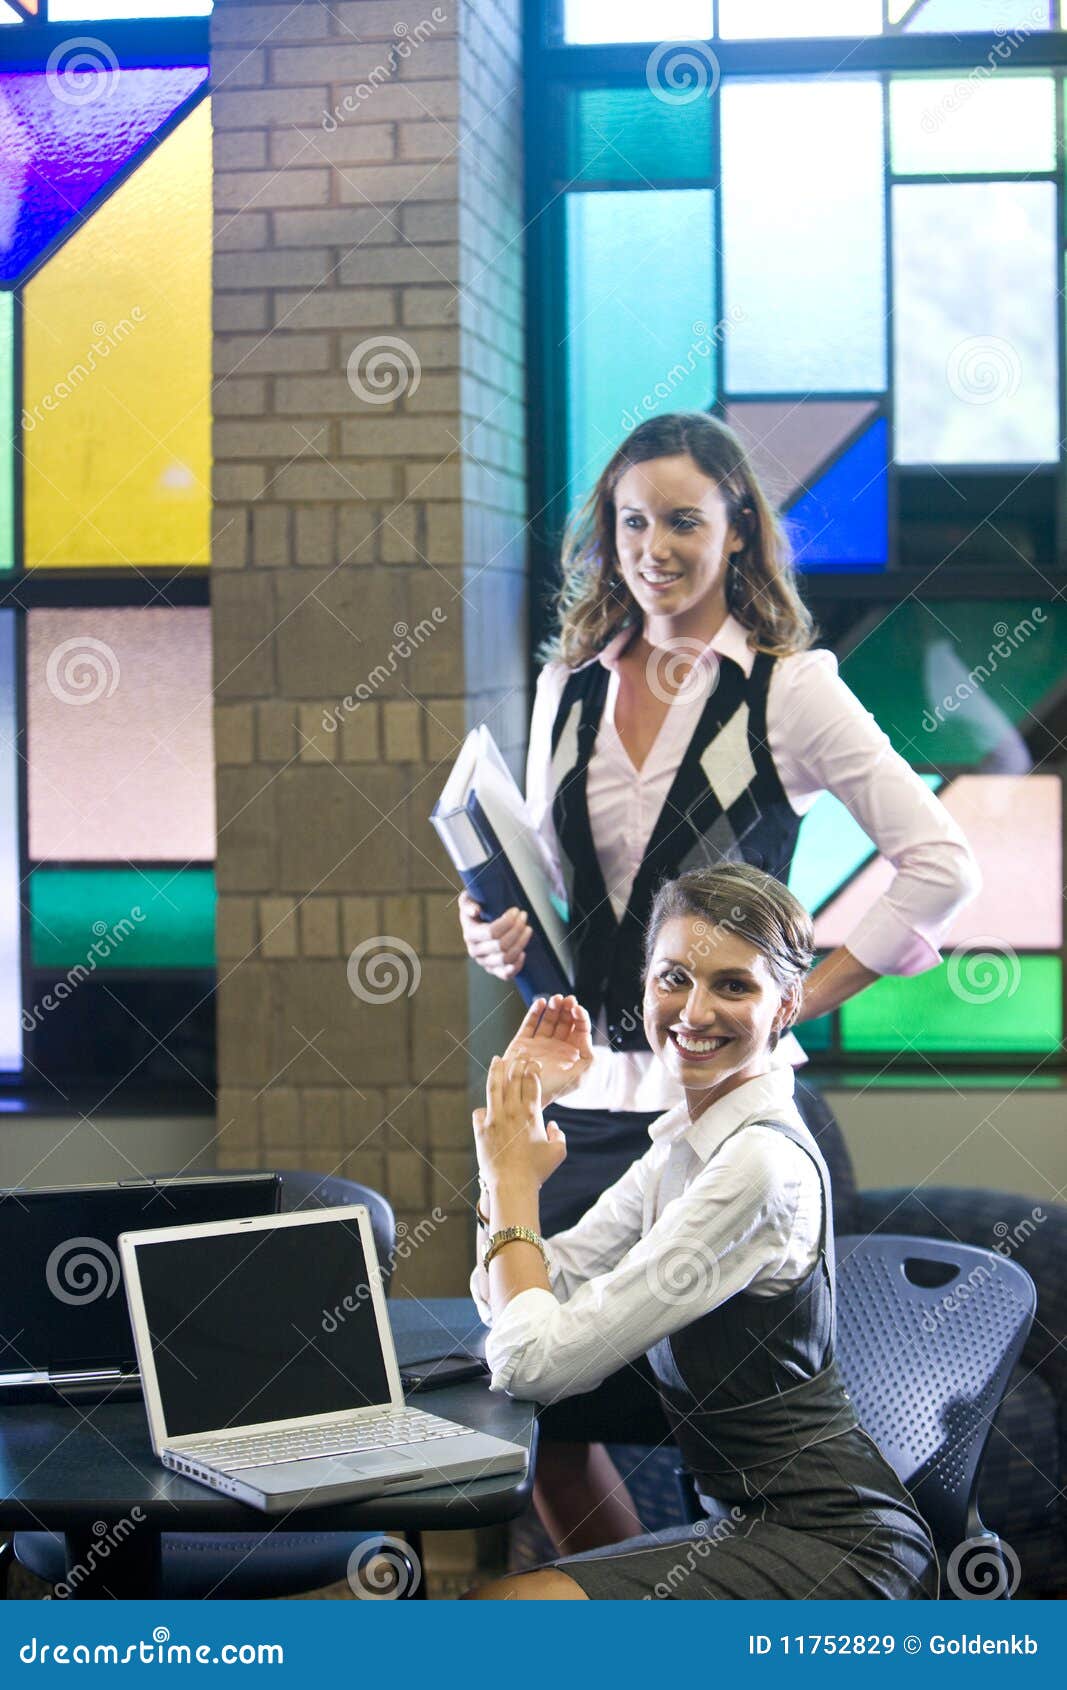 Two Young Women Meeting With Laptops At Table Stock Image - Image of brunette, female: 11752829